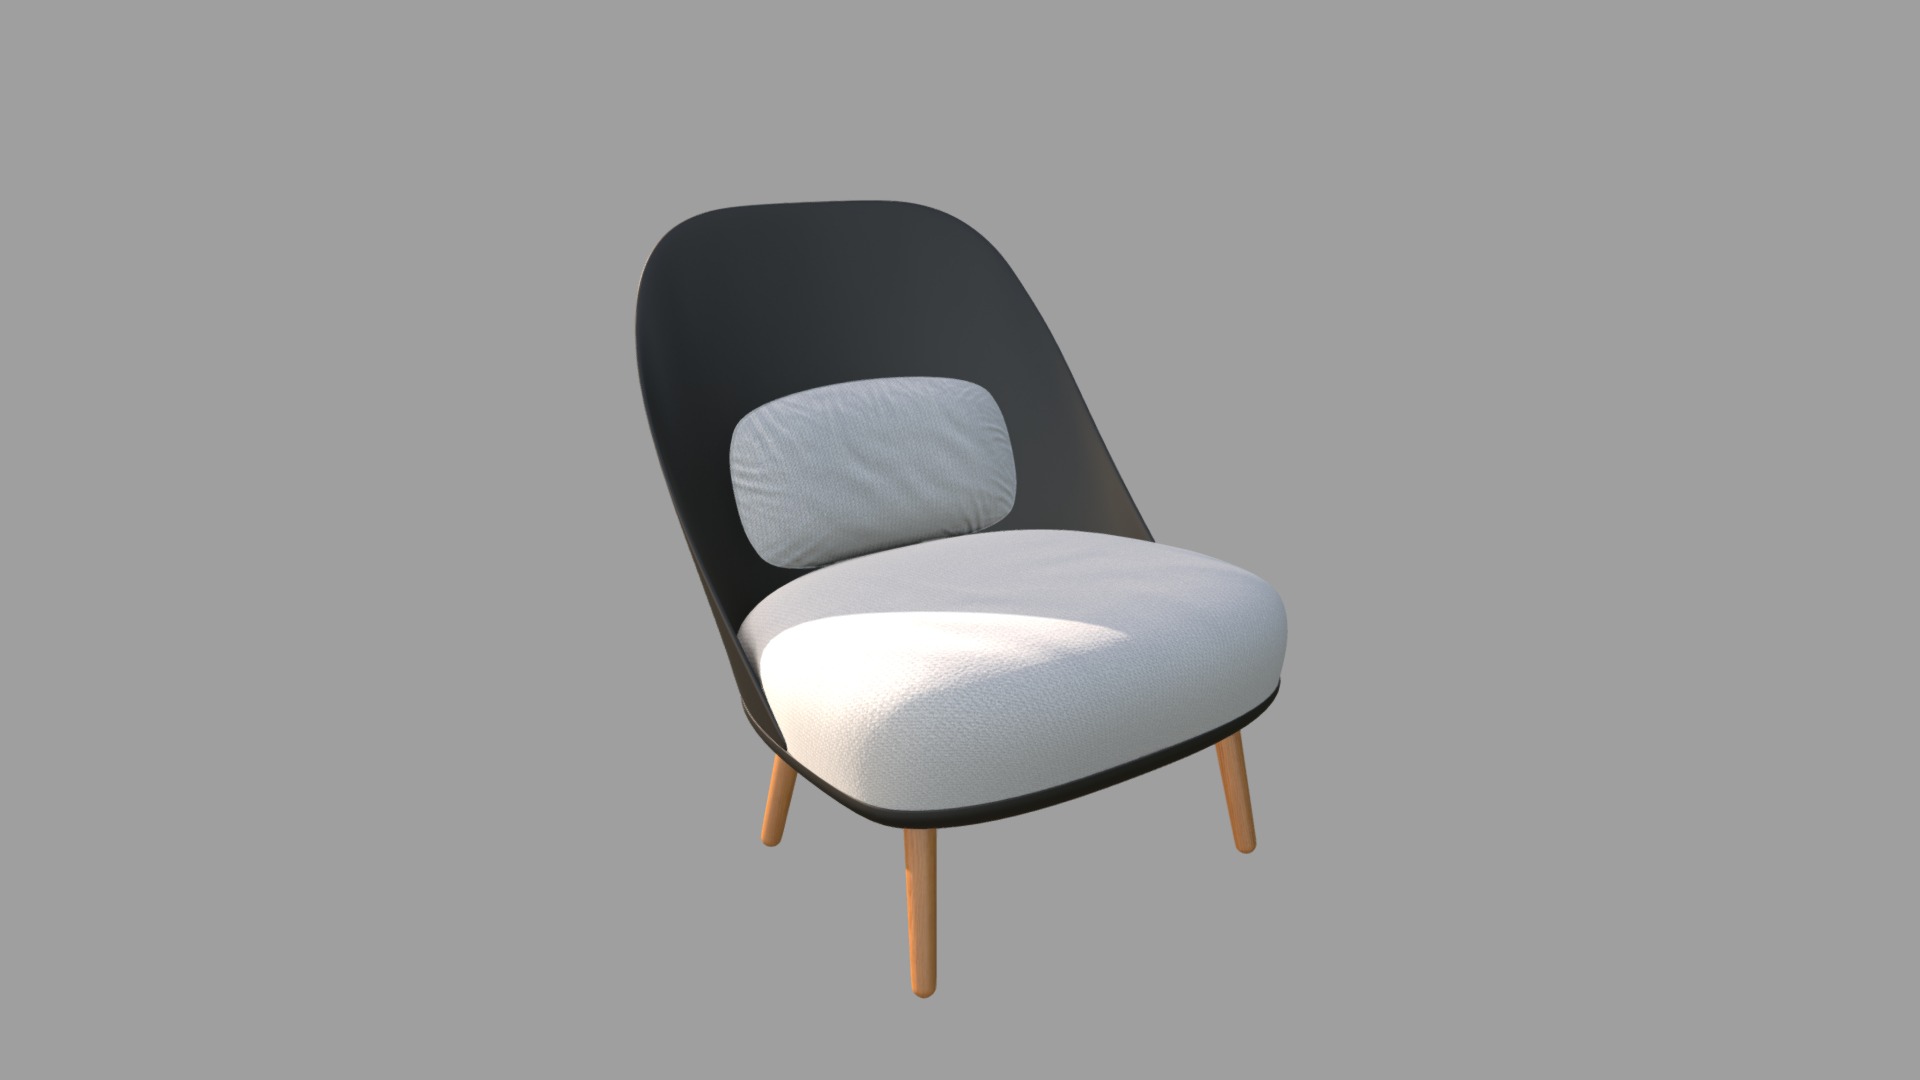 3D model Sofas Armchair Sklum Mhon - This is a 3D model of the Sofas Armchair Sklum Mhon. The 3D model is about a chair with a cushion.